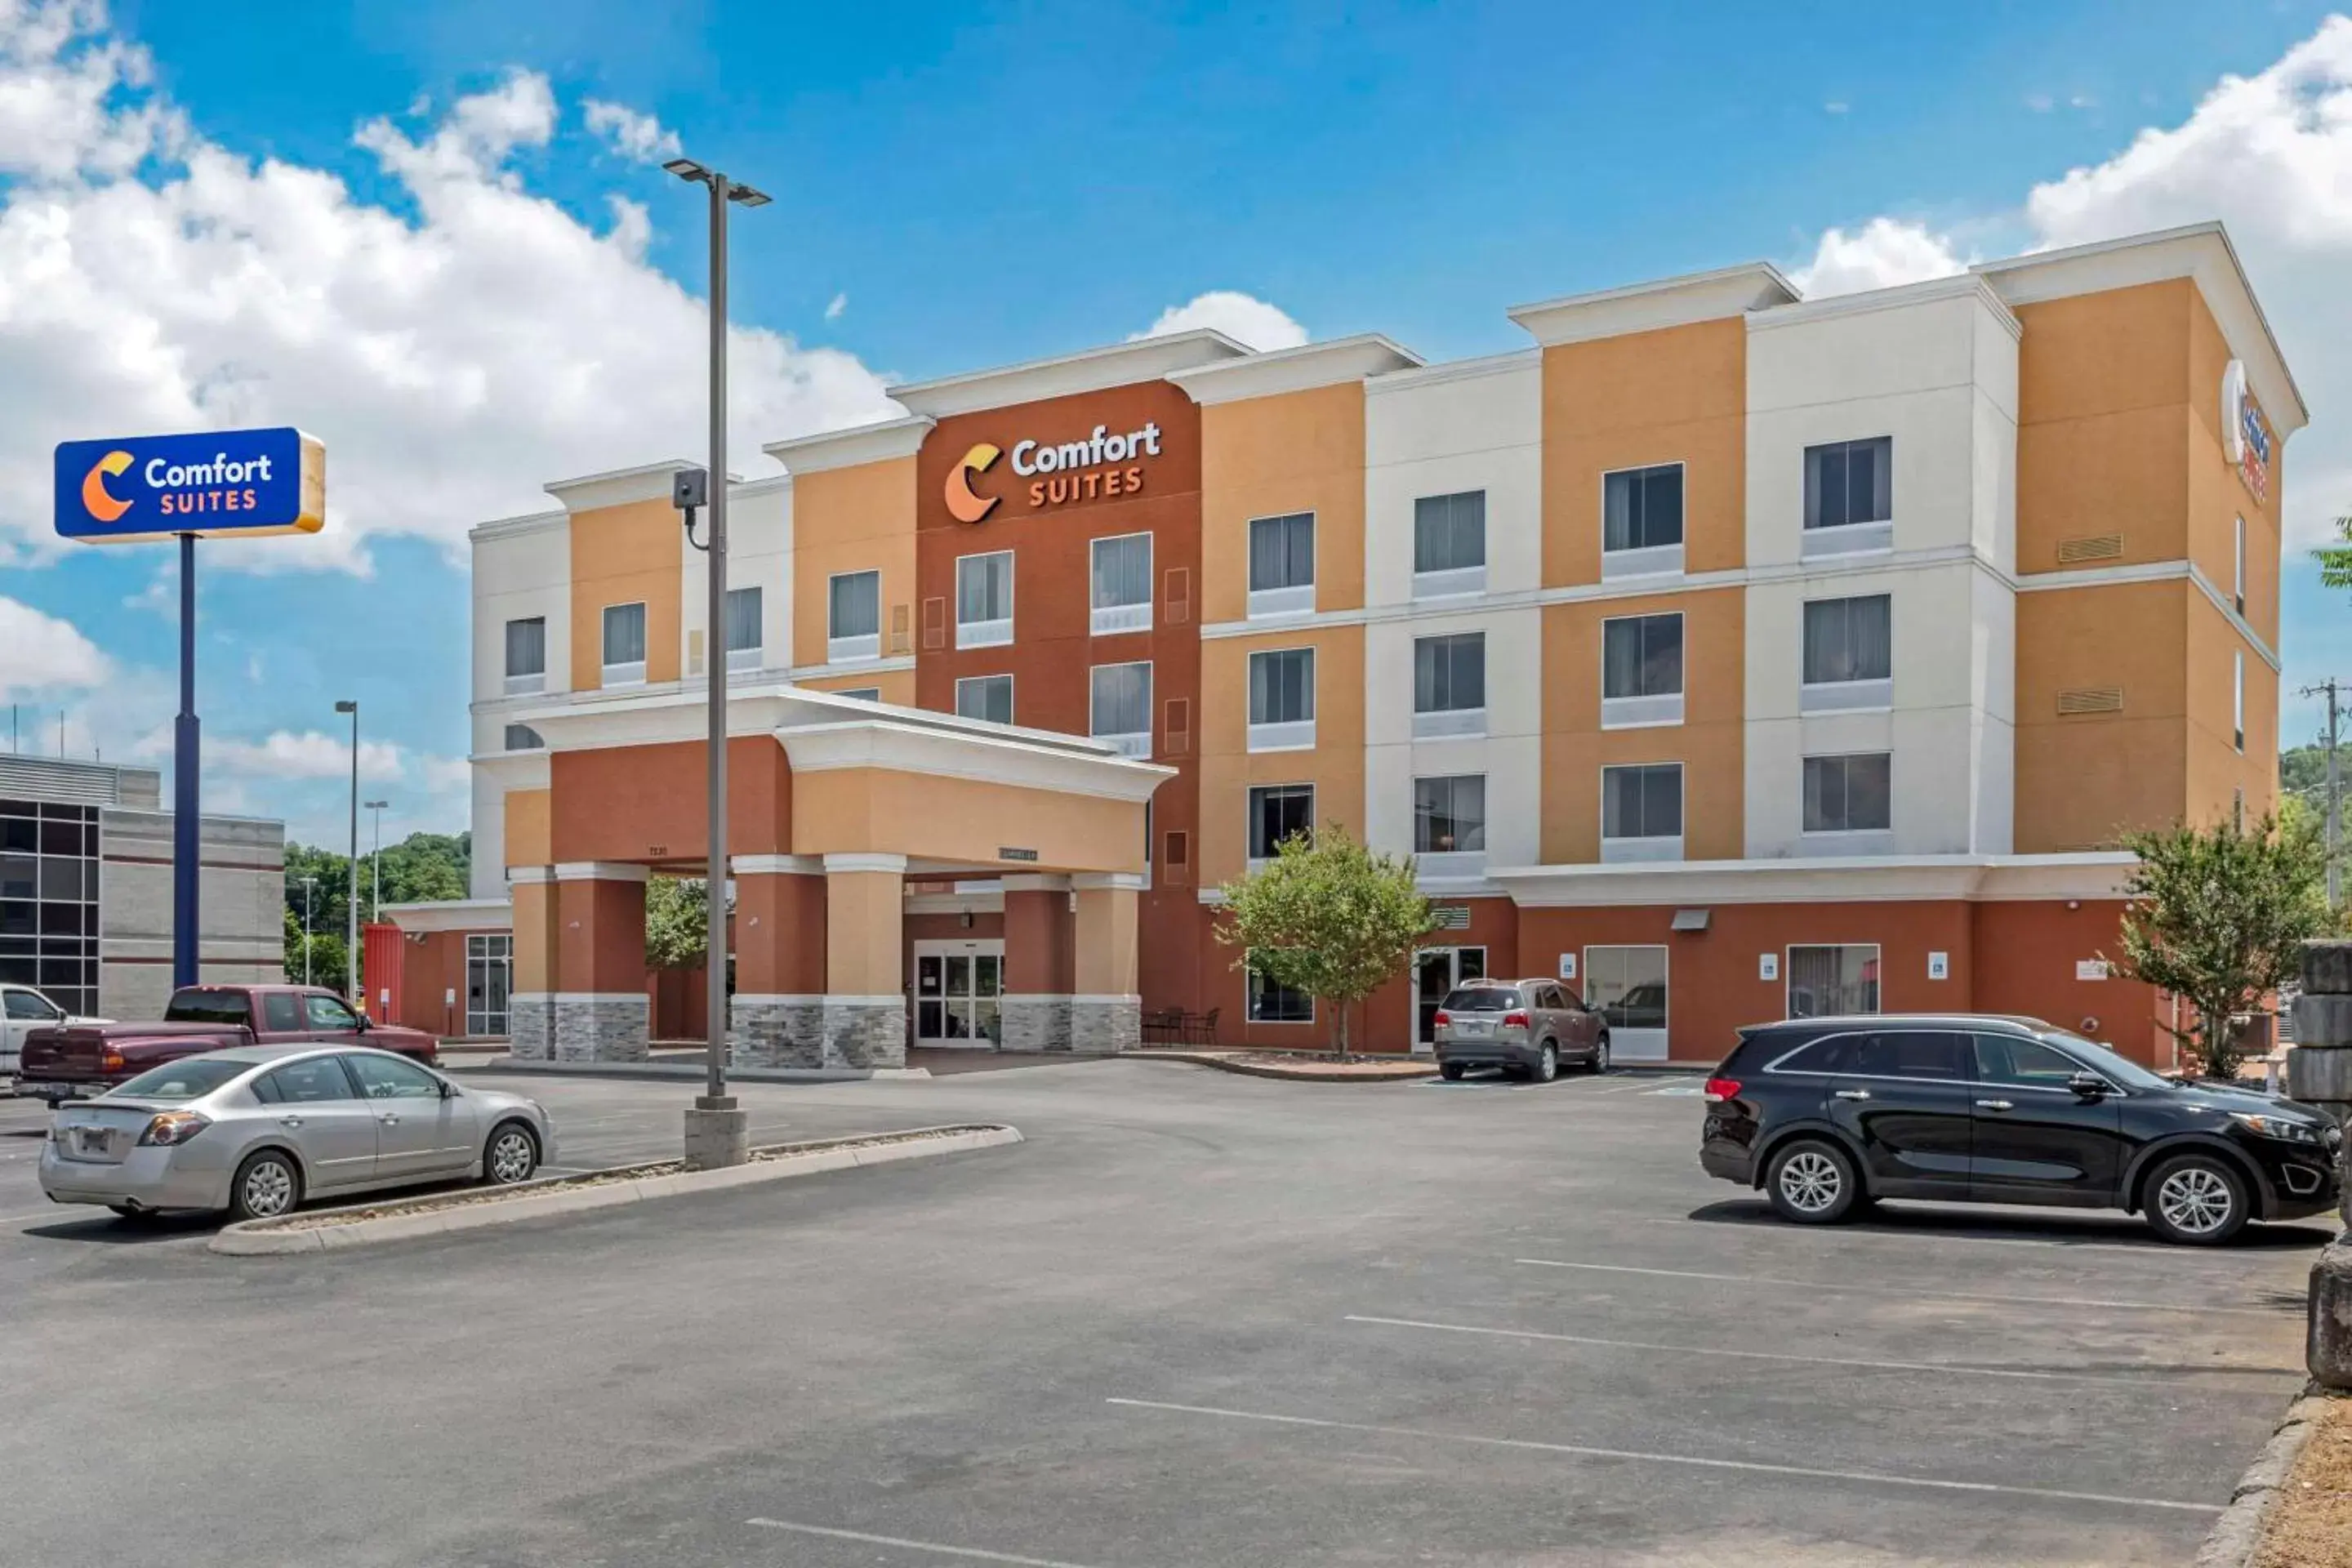 Property Building in Comfort Suites East Knoxville